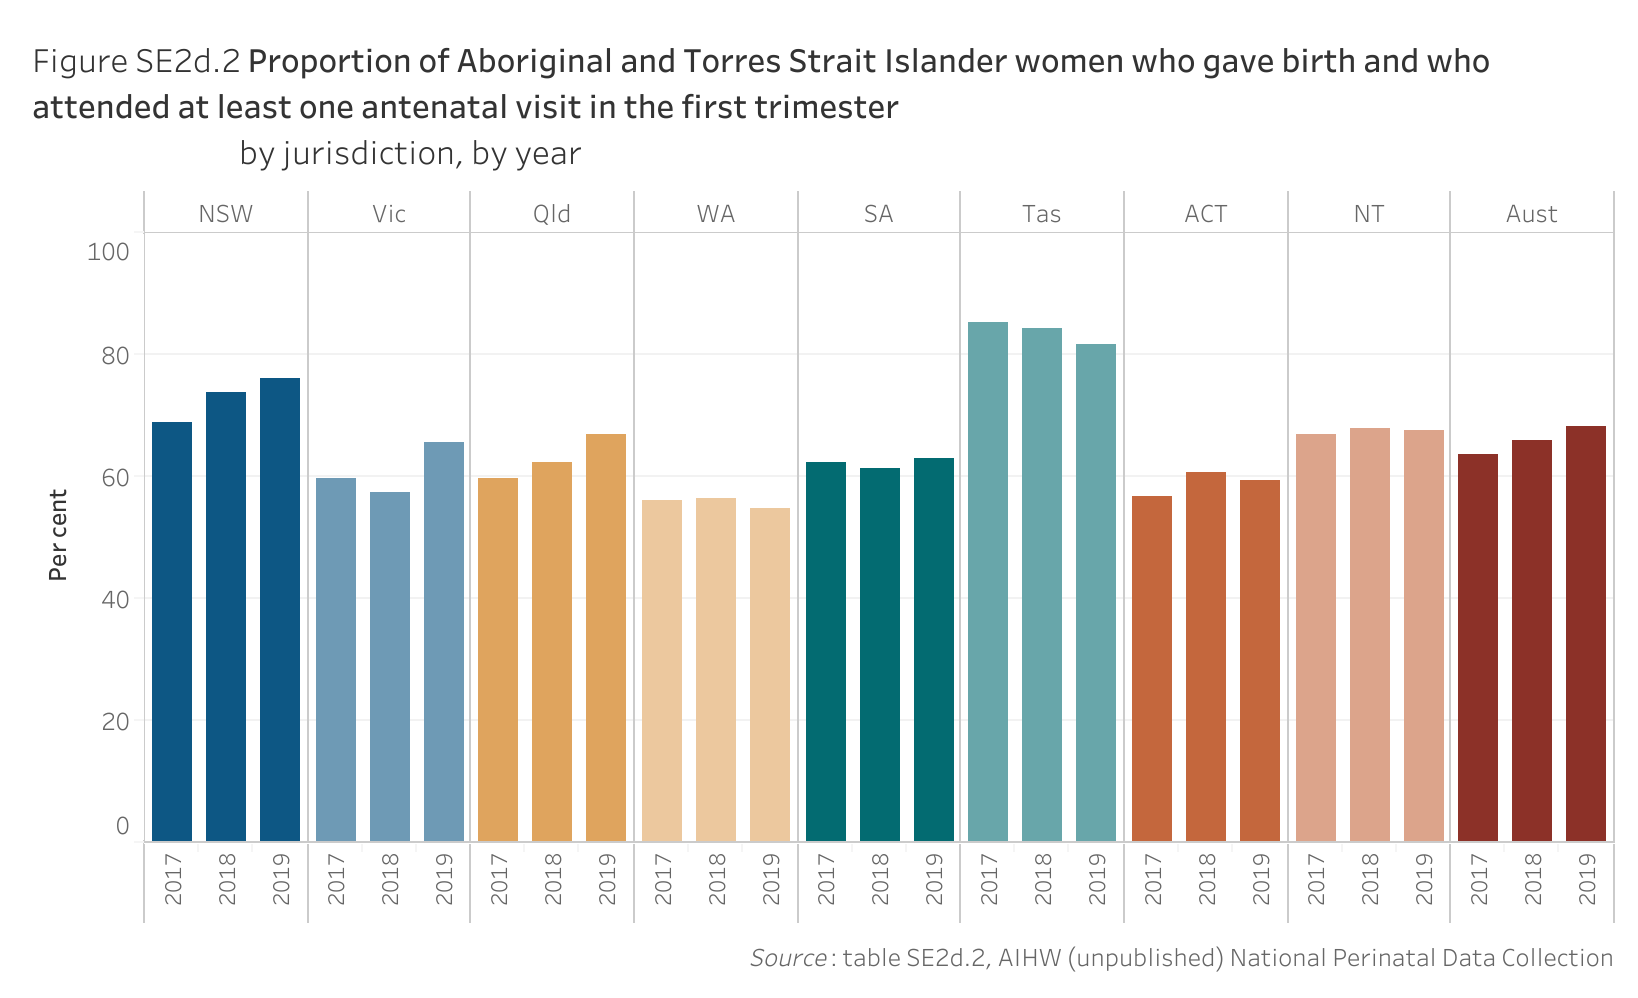 Figure SE2d.2. Bar chart showing the proportion of Aboriginal and Torres Strait Islander women who gave birth and who attended at least one antenatal visit in the first trimester, by jurisdiction and by year. Data table of figure SE2d.2 is below.